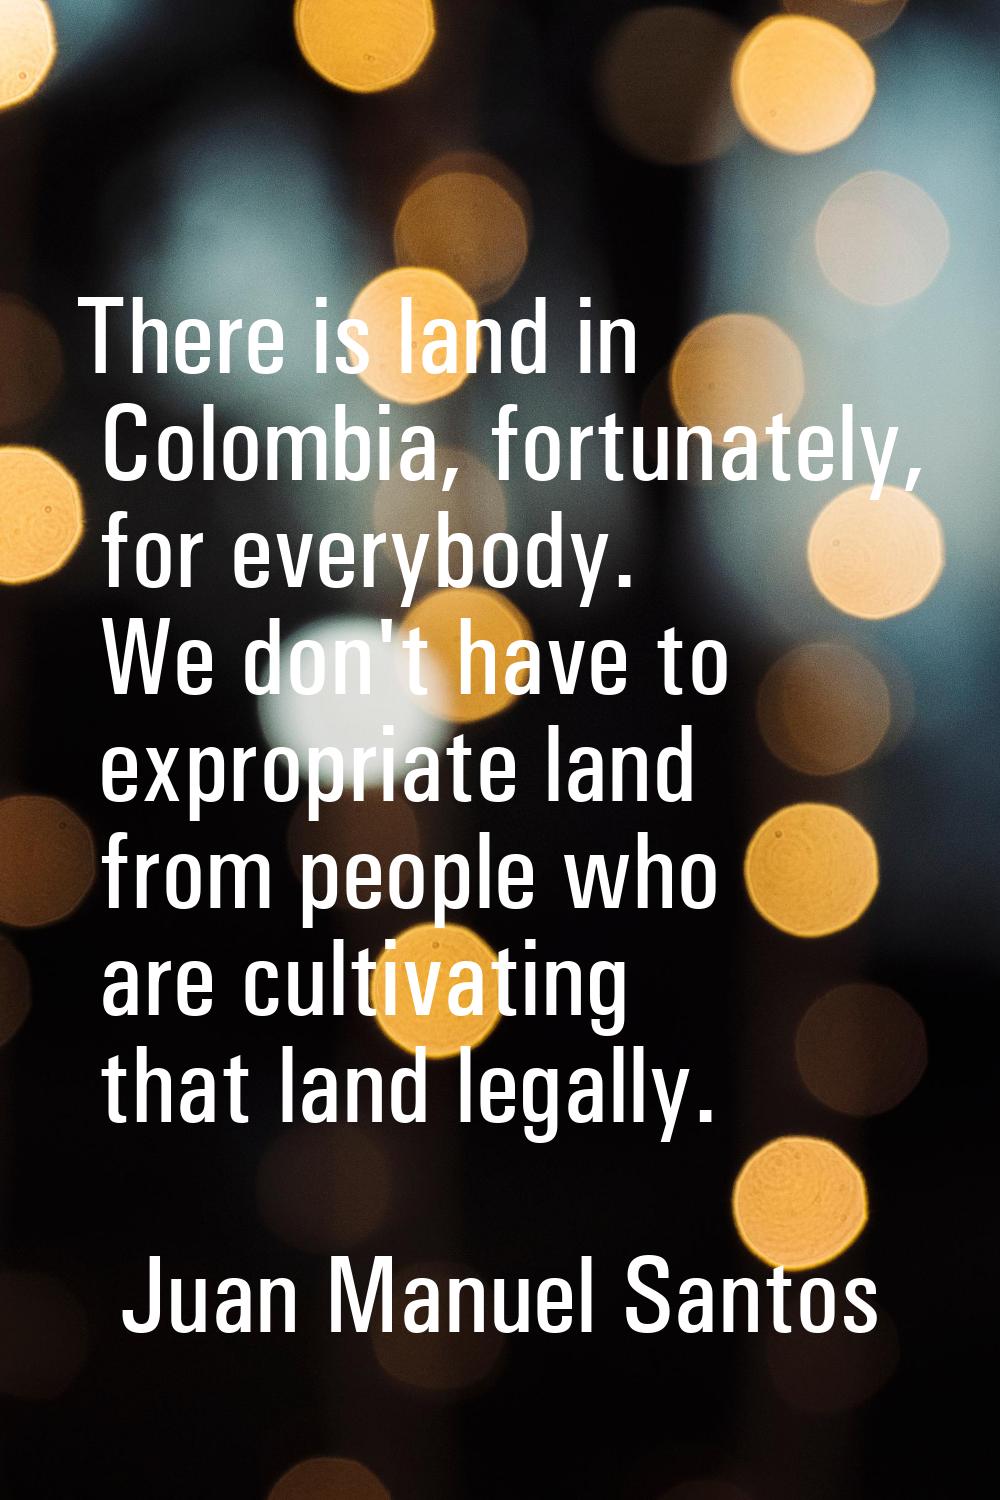 There is land in Colombia, fortunately, for everybody. We don't have to expropriate land from peopl